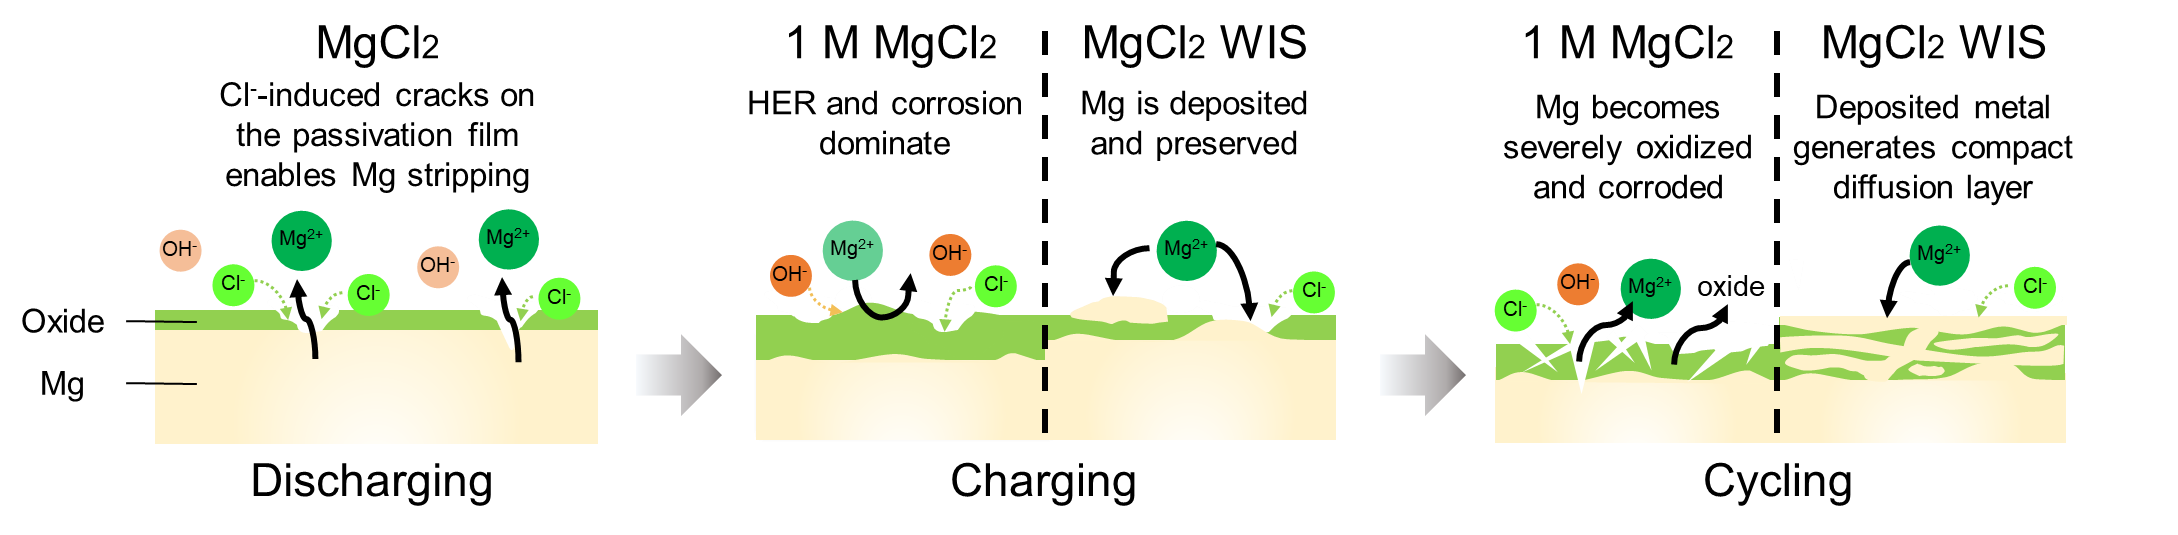 Schematic structure of the aqueous Mg battery developed by the research team